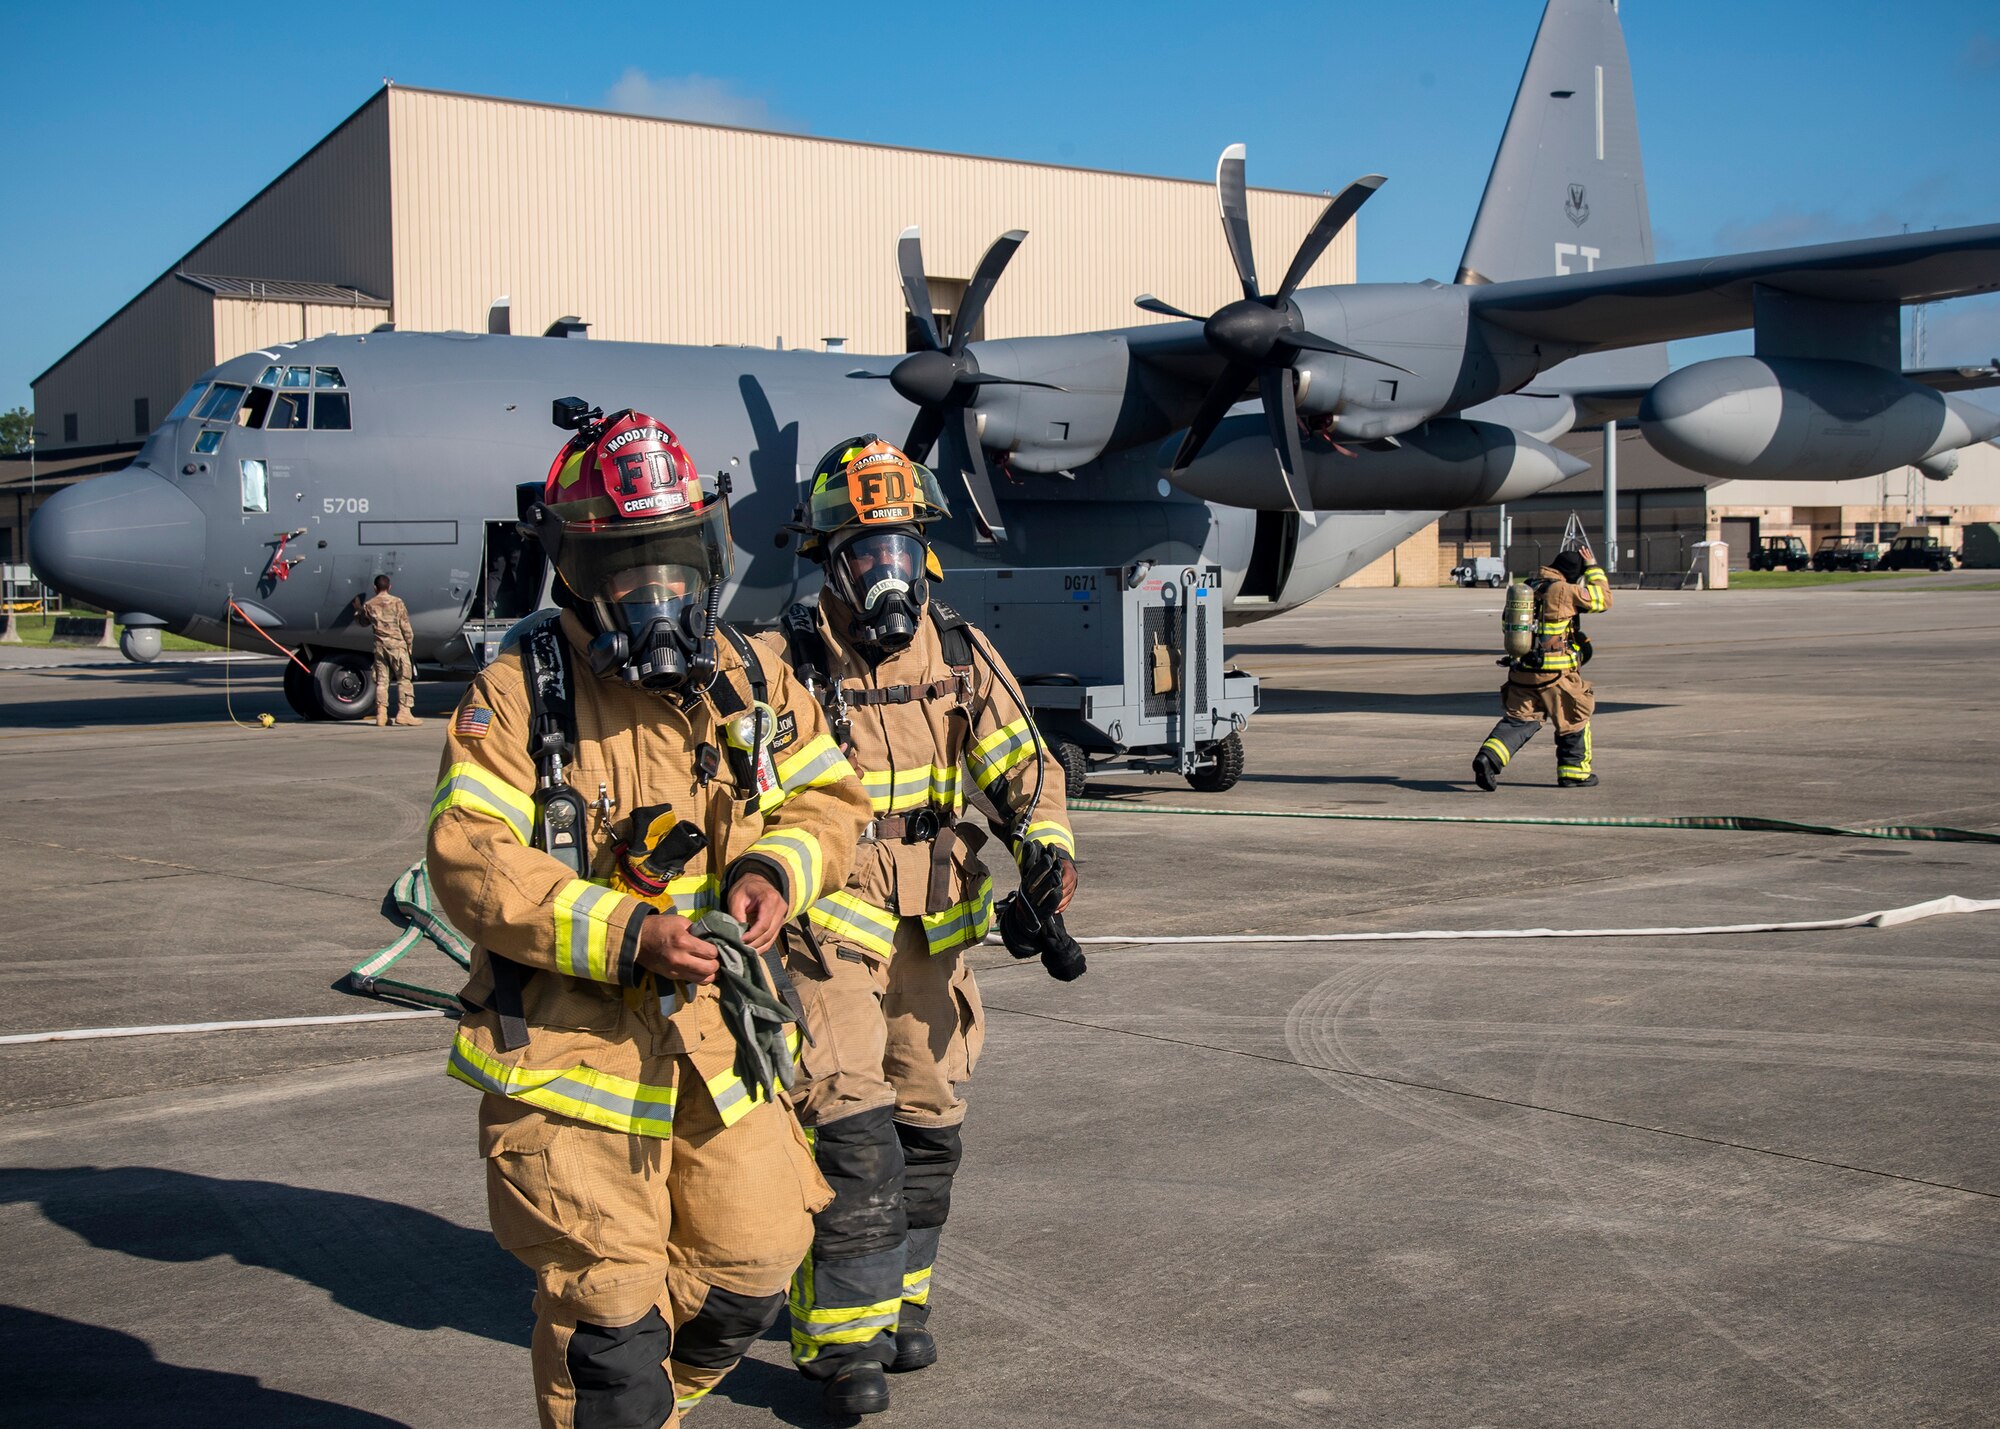 Firefighters from the 23d Civil Engineer Squadron (CES), take off their personal protective gear following HC-130J Combat King II egress training, July 11, 2019, at Moody Air Force Base, Ga. Firefighters conducted the training to evaluate their overall knowledge and proficiency of how to properly shut down and rescue personnel from a C-130 during an emergency situation. The training required the firefighters to properly enter and ventilate the aircraft while conducting swift rescue techniques to safely locate and remove passengers from the aircraft. (U.S. Air Force photo by Airman 1st Class Eugene Oliver)